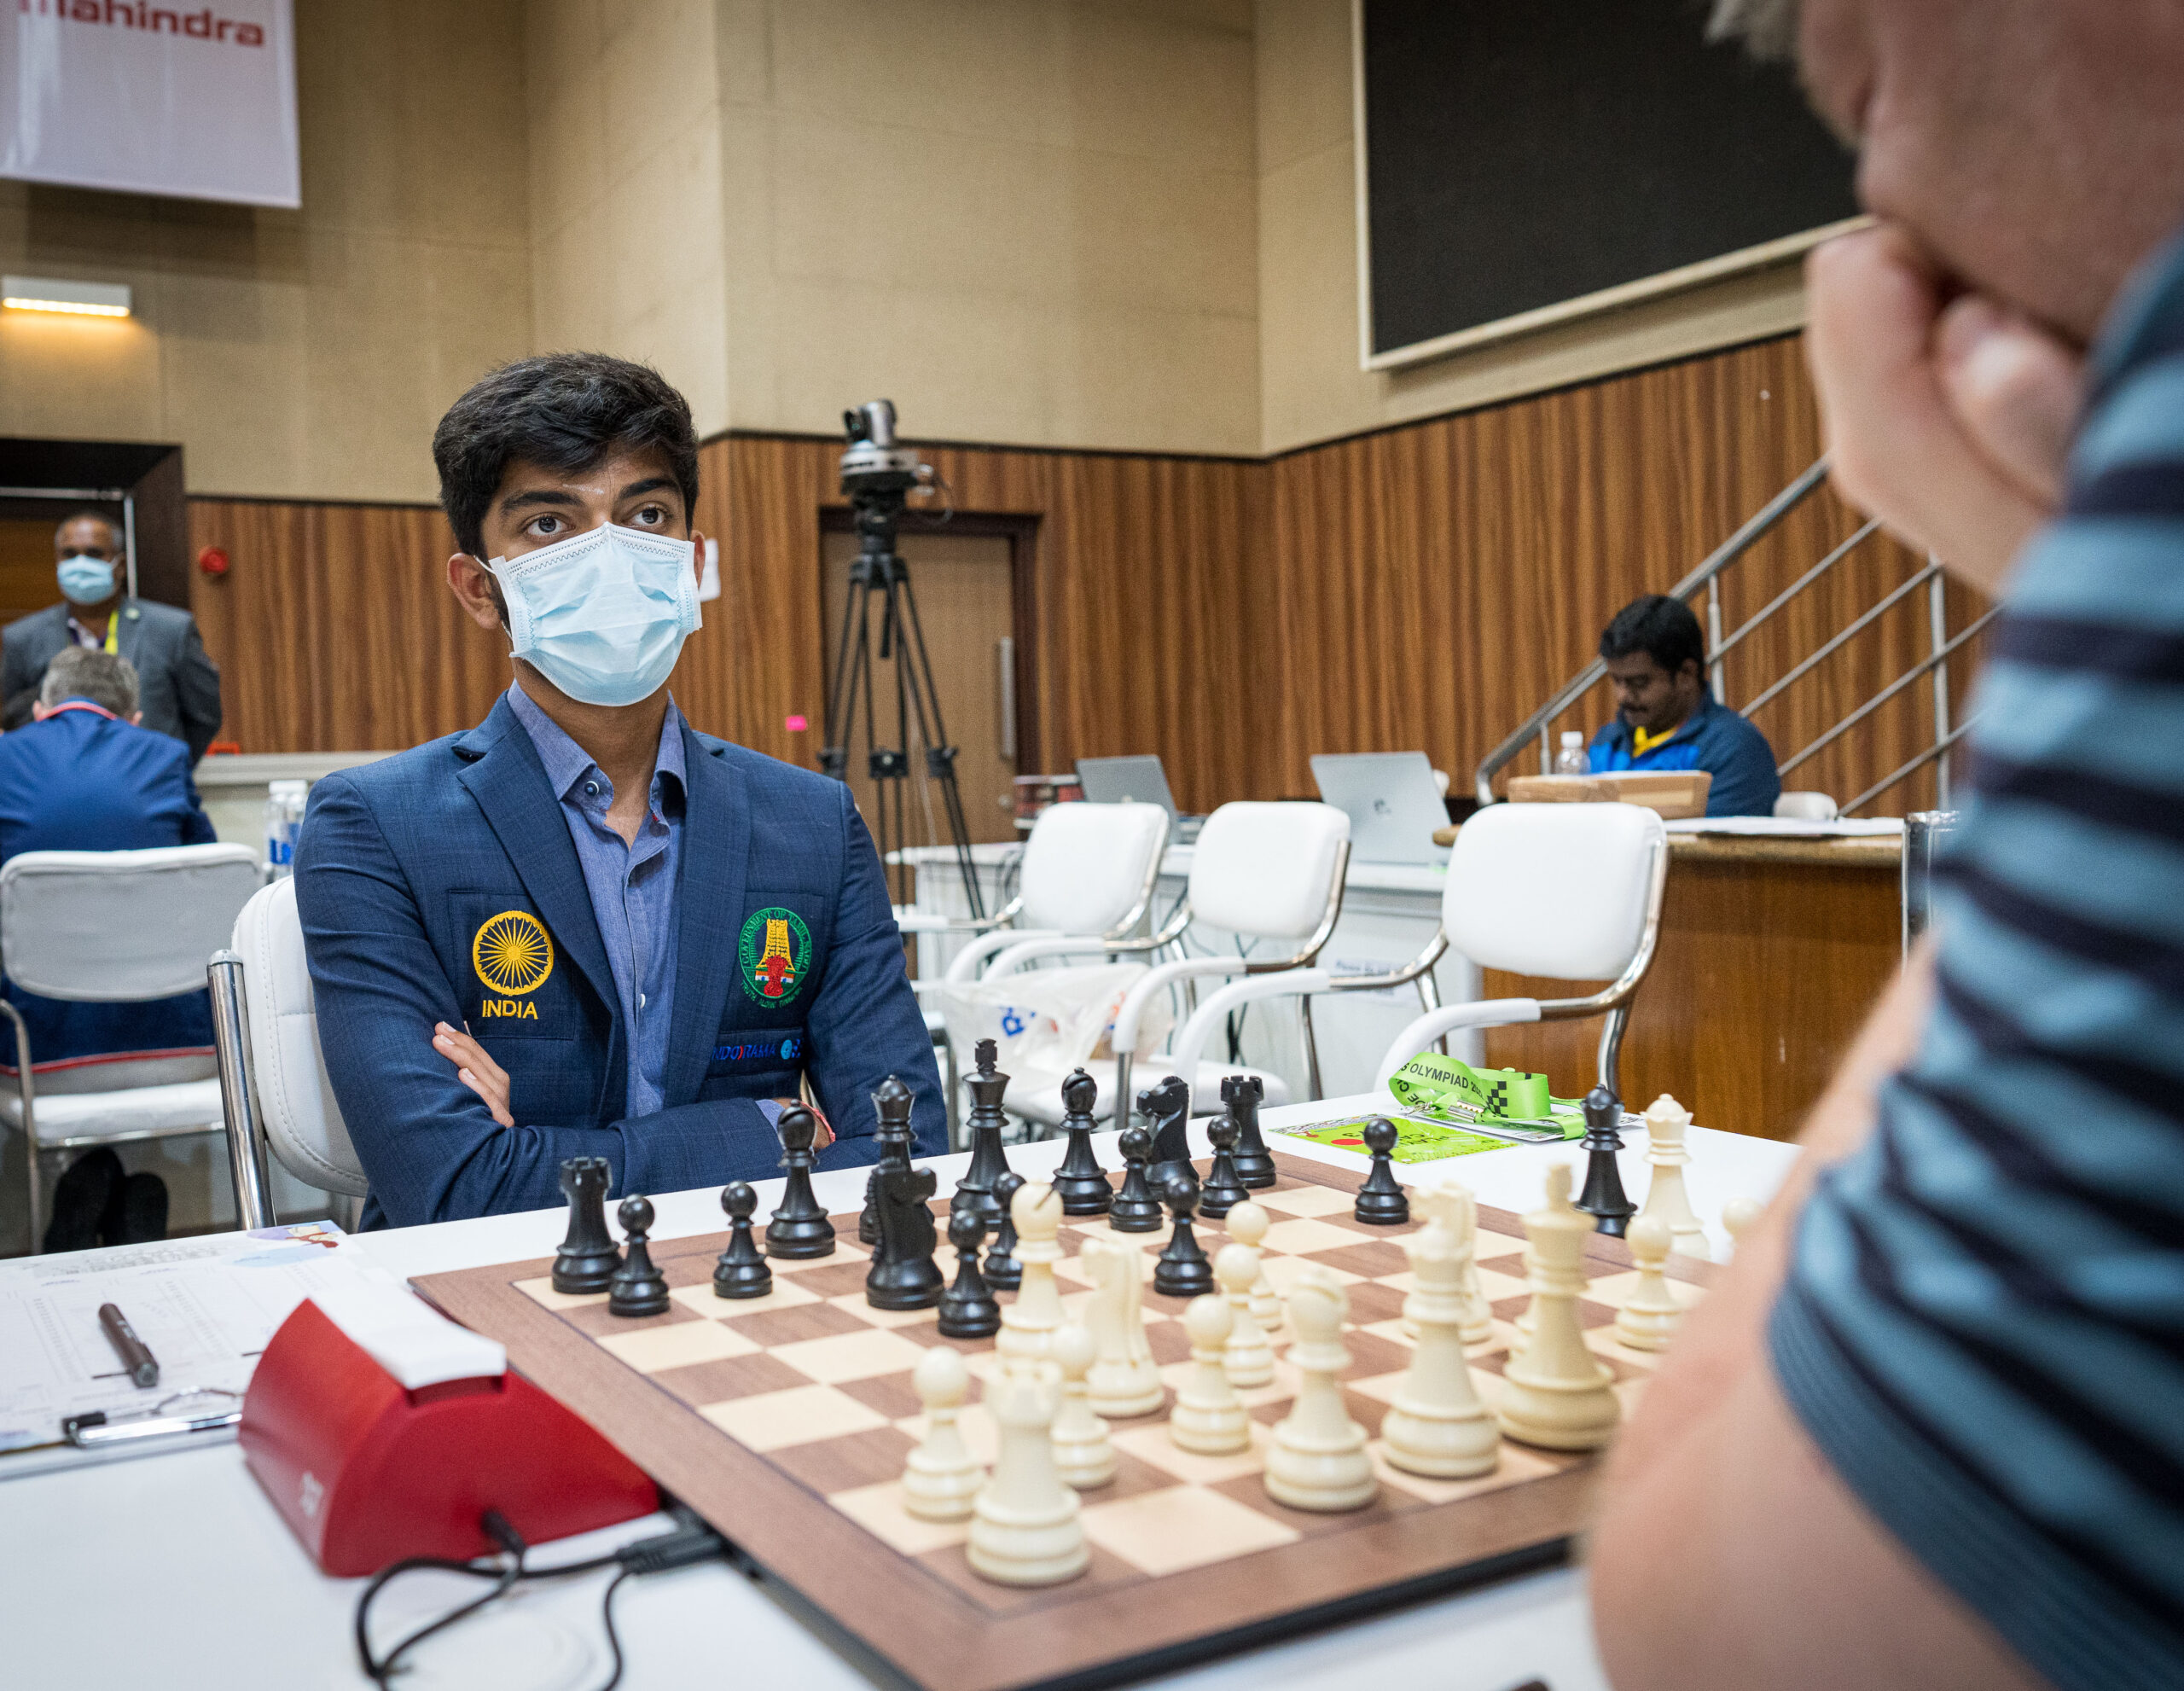 Historic day for 16-year-old D. Gukesh as he becomes the youngest